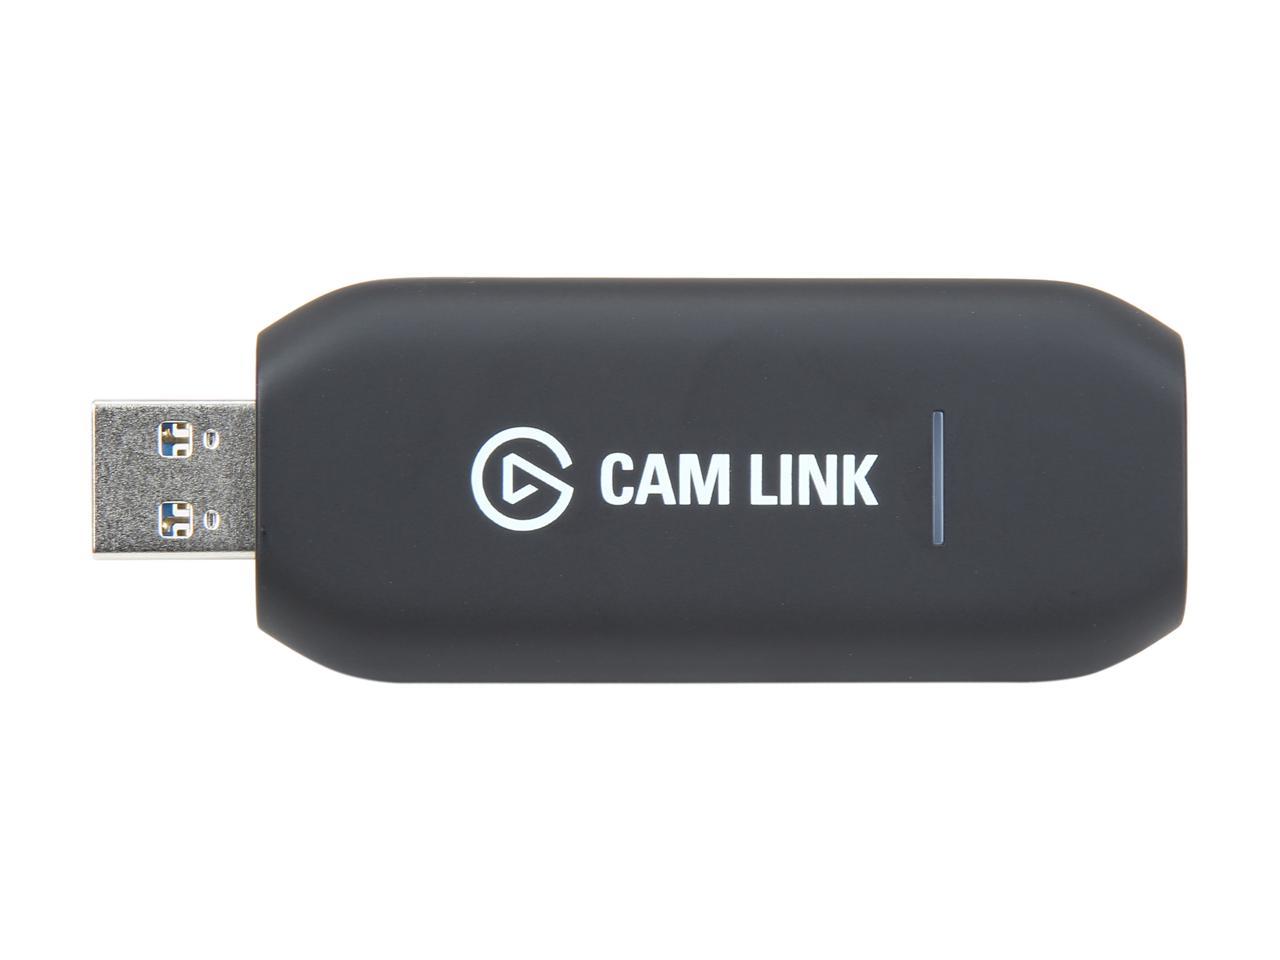 Elgato Cam Link Broadcast Live And Record Via Dslr Camcorder Or Action Cam In 1080p 60 Fps Compact Hdmi Capture Device Usb 3 0 Newegg Com